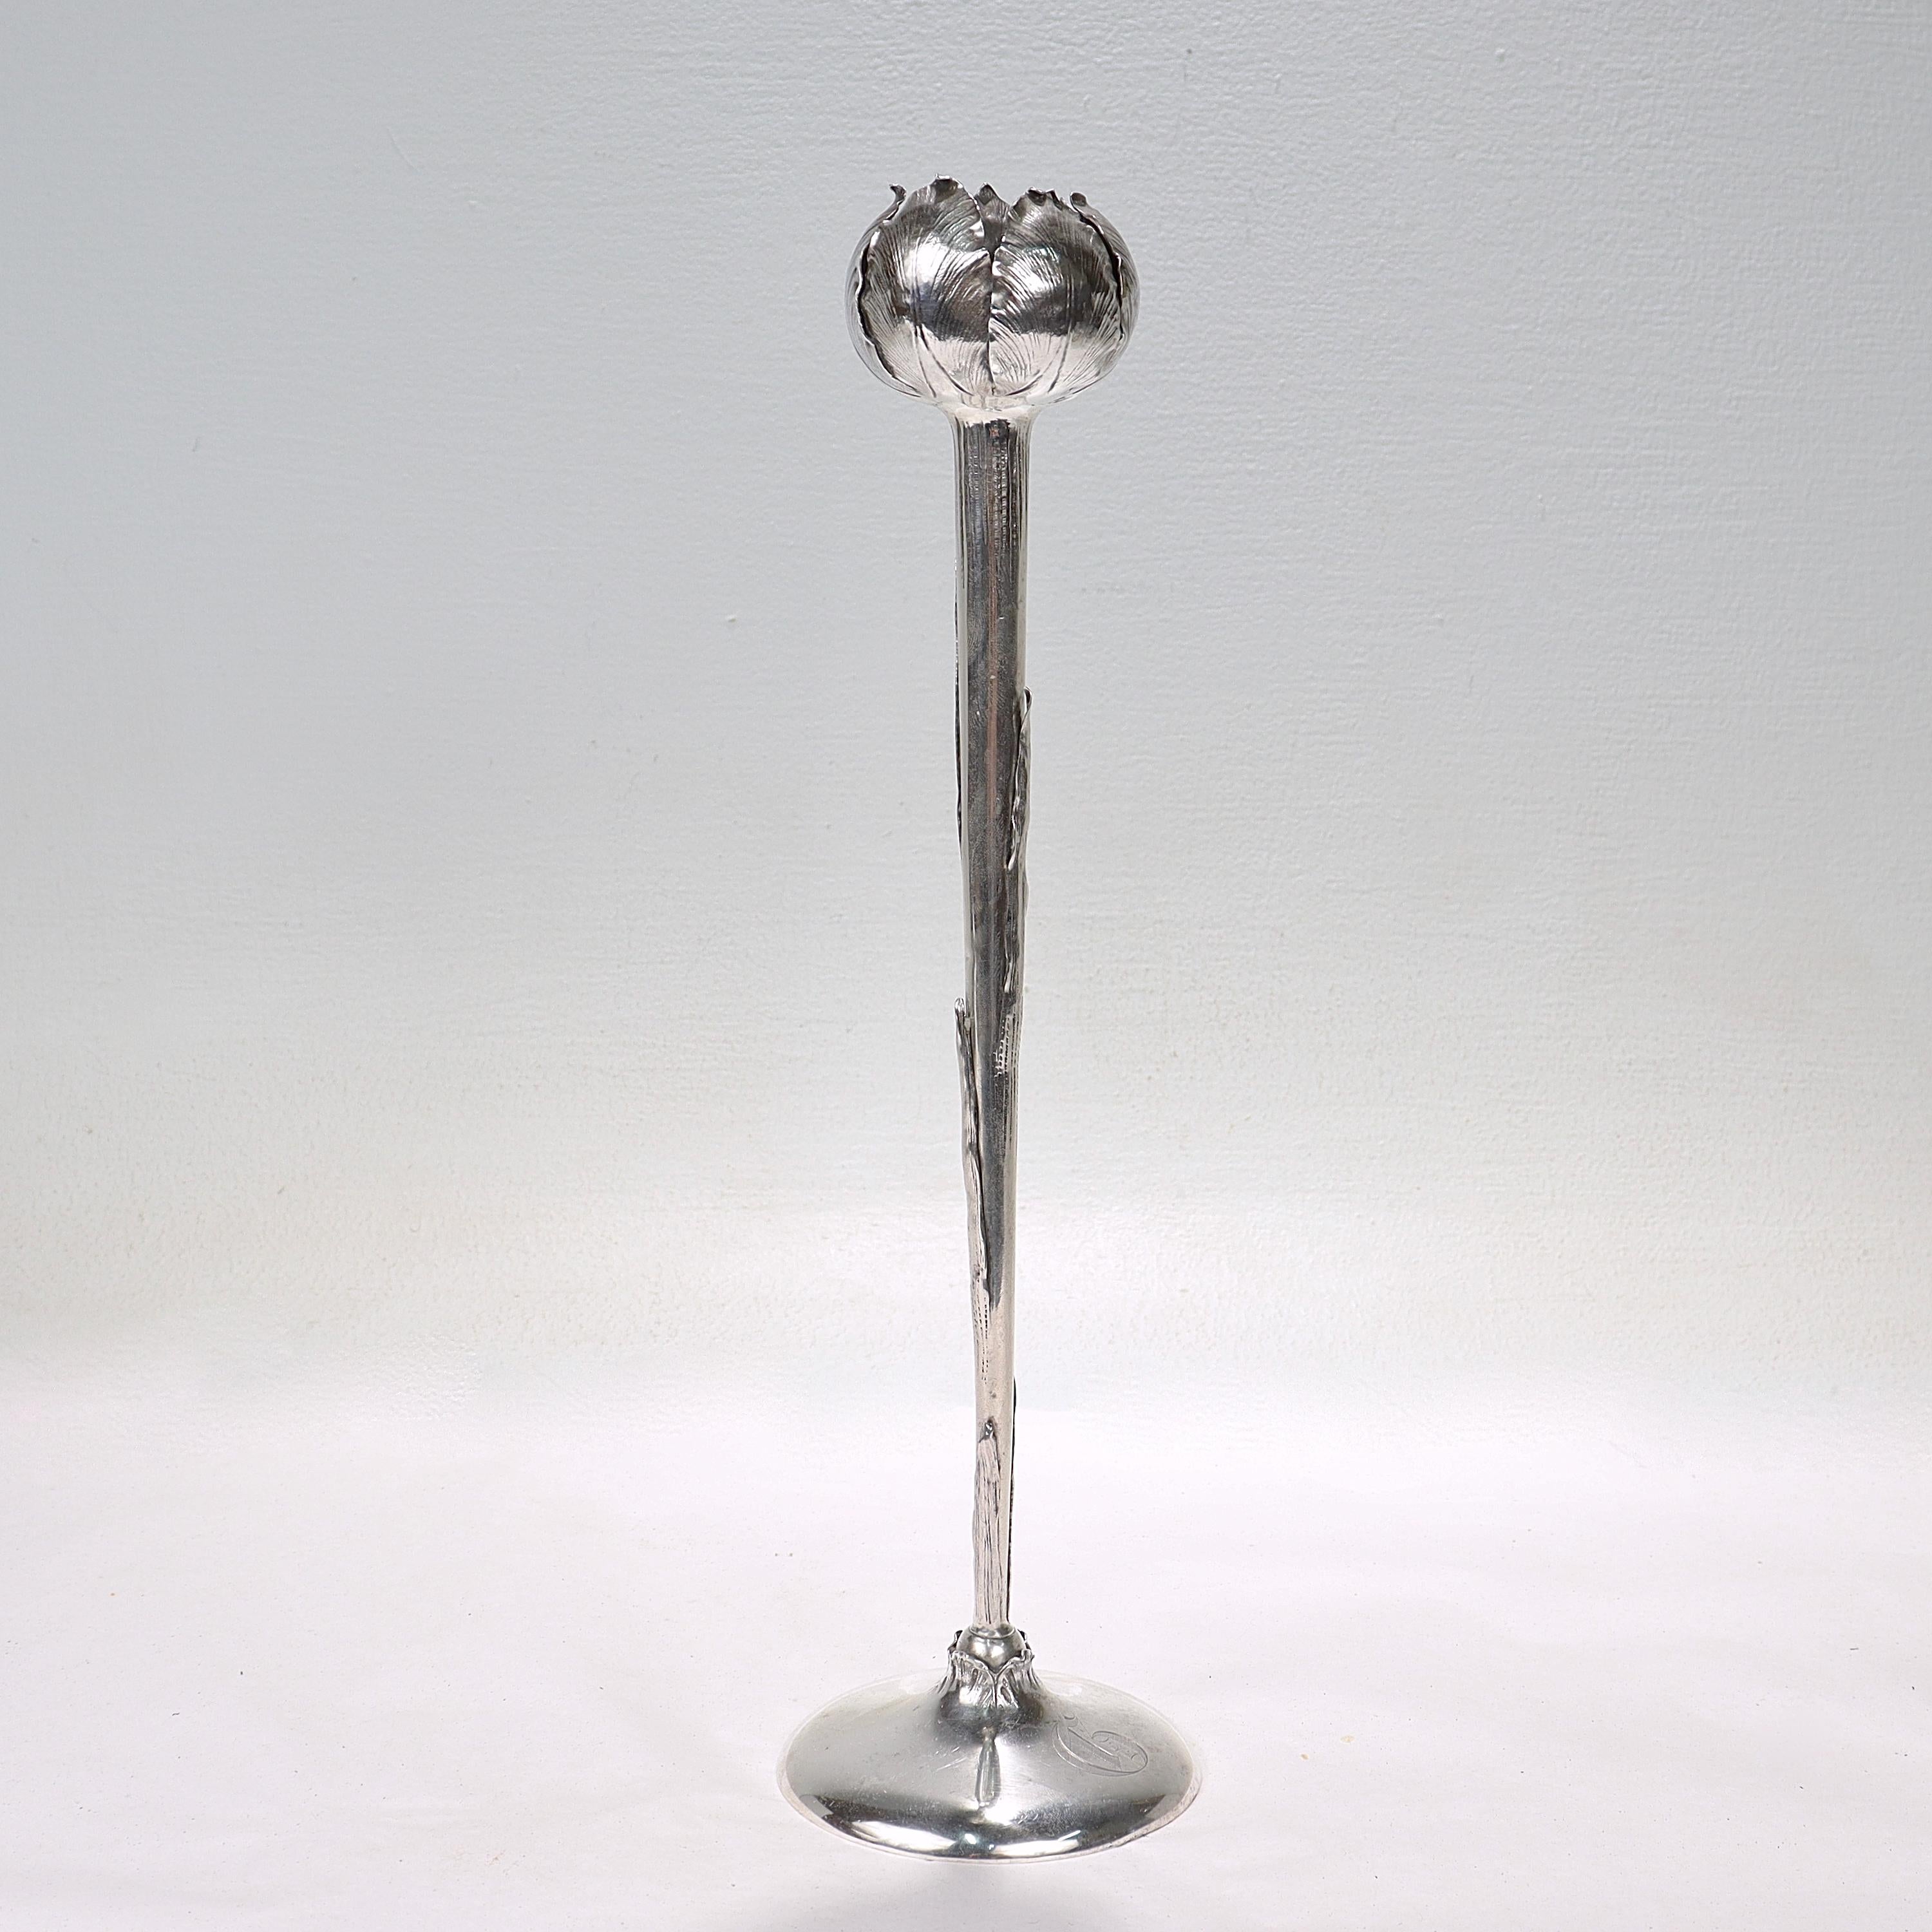 A fine antique sterling silver bud vase.

In the form of a single tall tulip emerging from a monogrammed circular base.

Retailed by Bailey, Banks, and Biddle.

Simply a great American Art Nouveau sterling silver vase! 

Date:
Early 20th